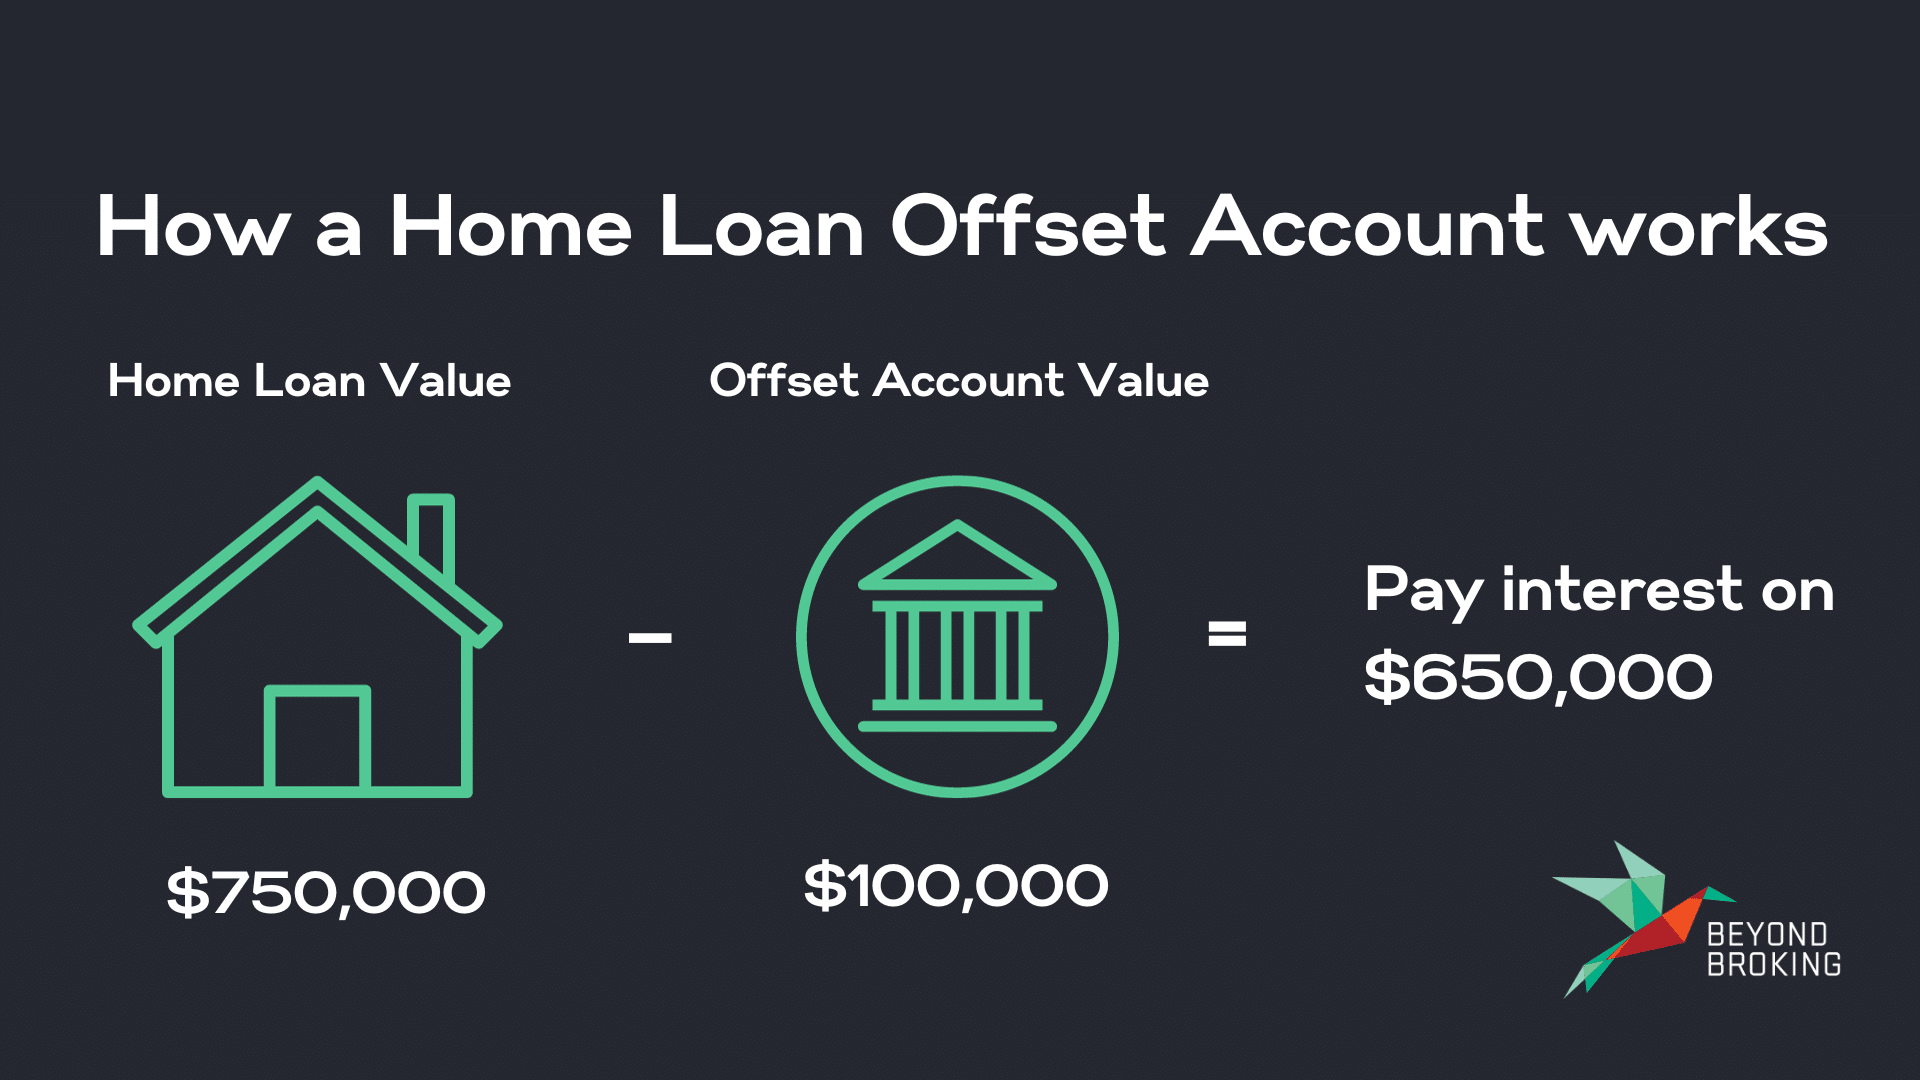 How a home loan offset account works